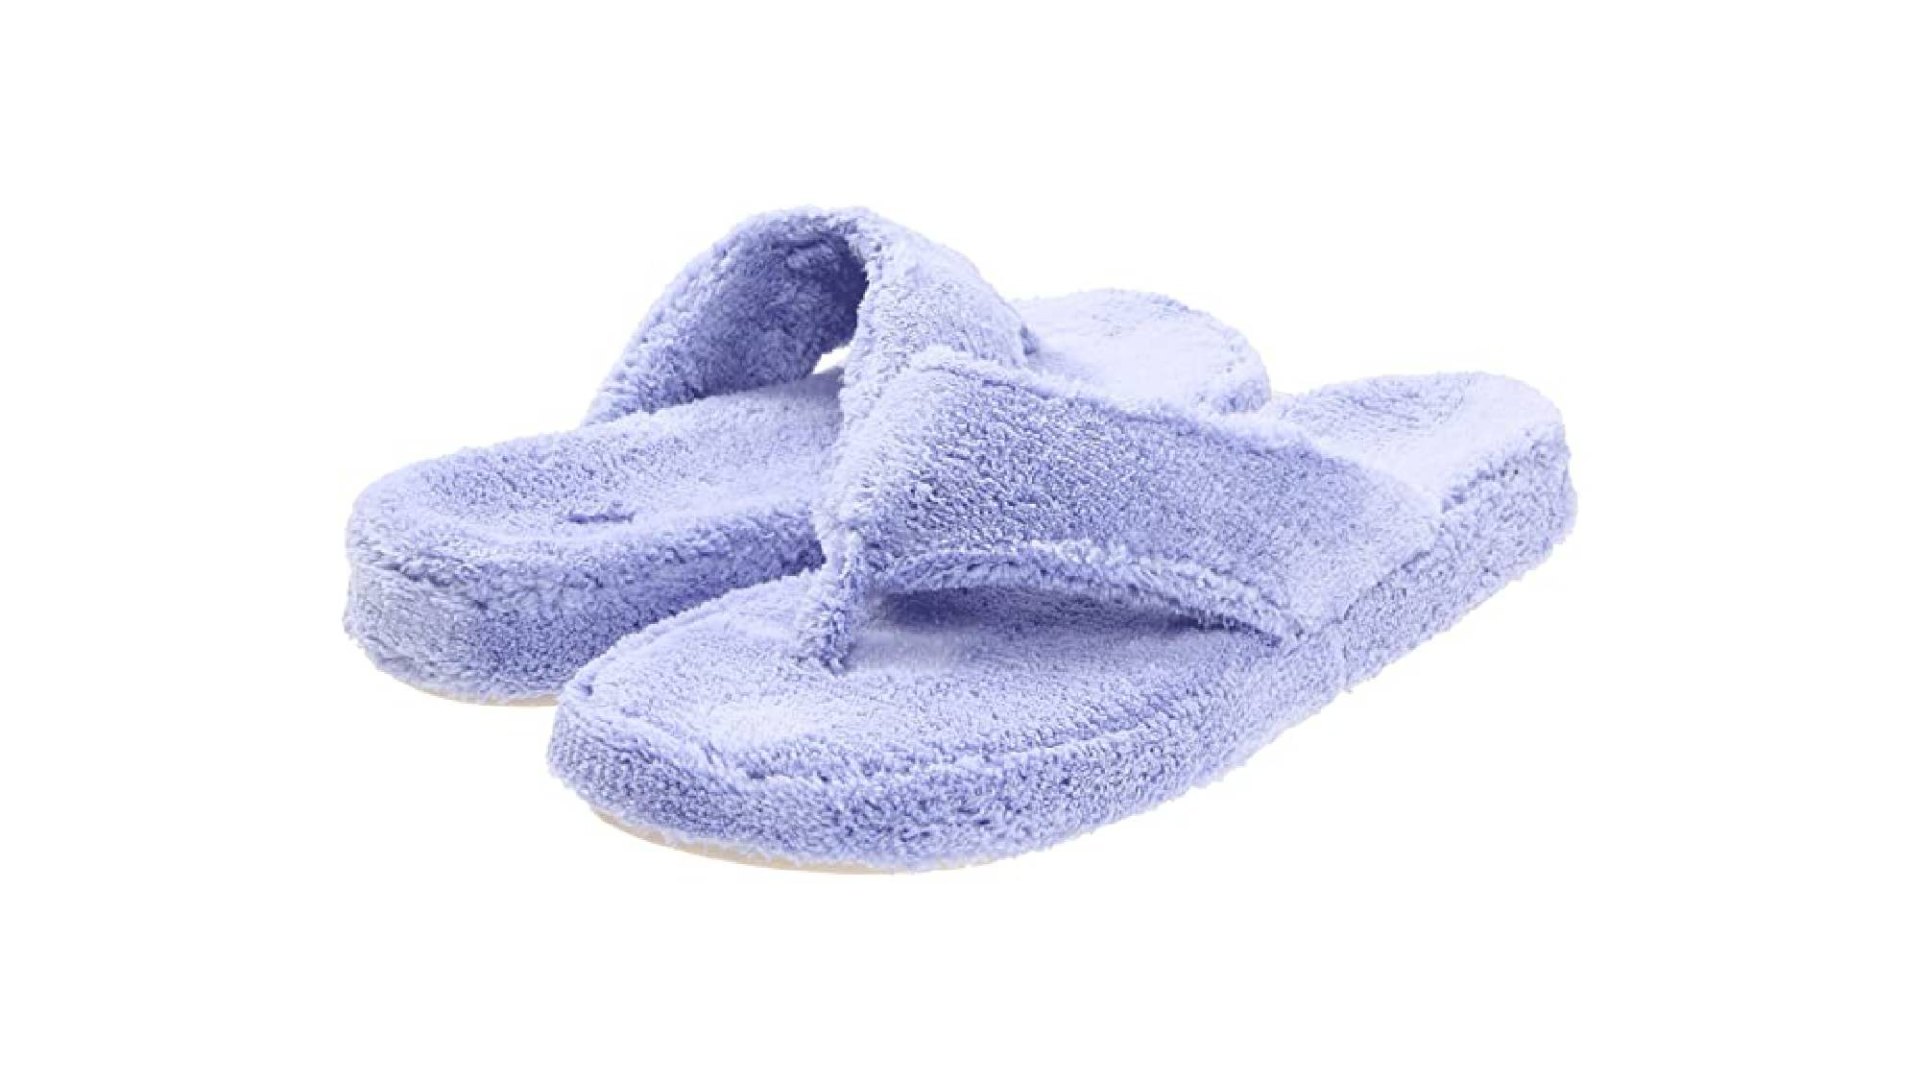 Acorn Fuzzy Flip Flop Slippers Come in So Many Amazing Colors